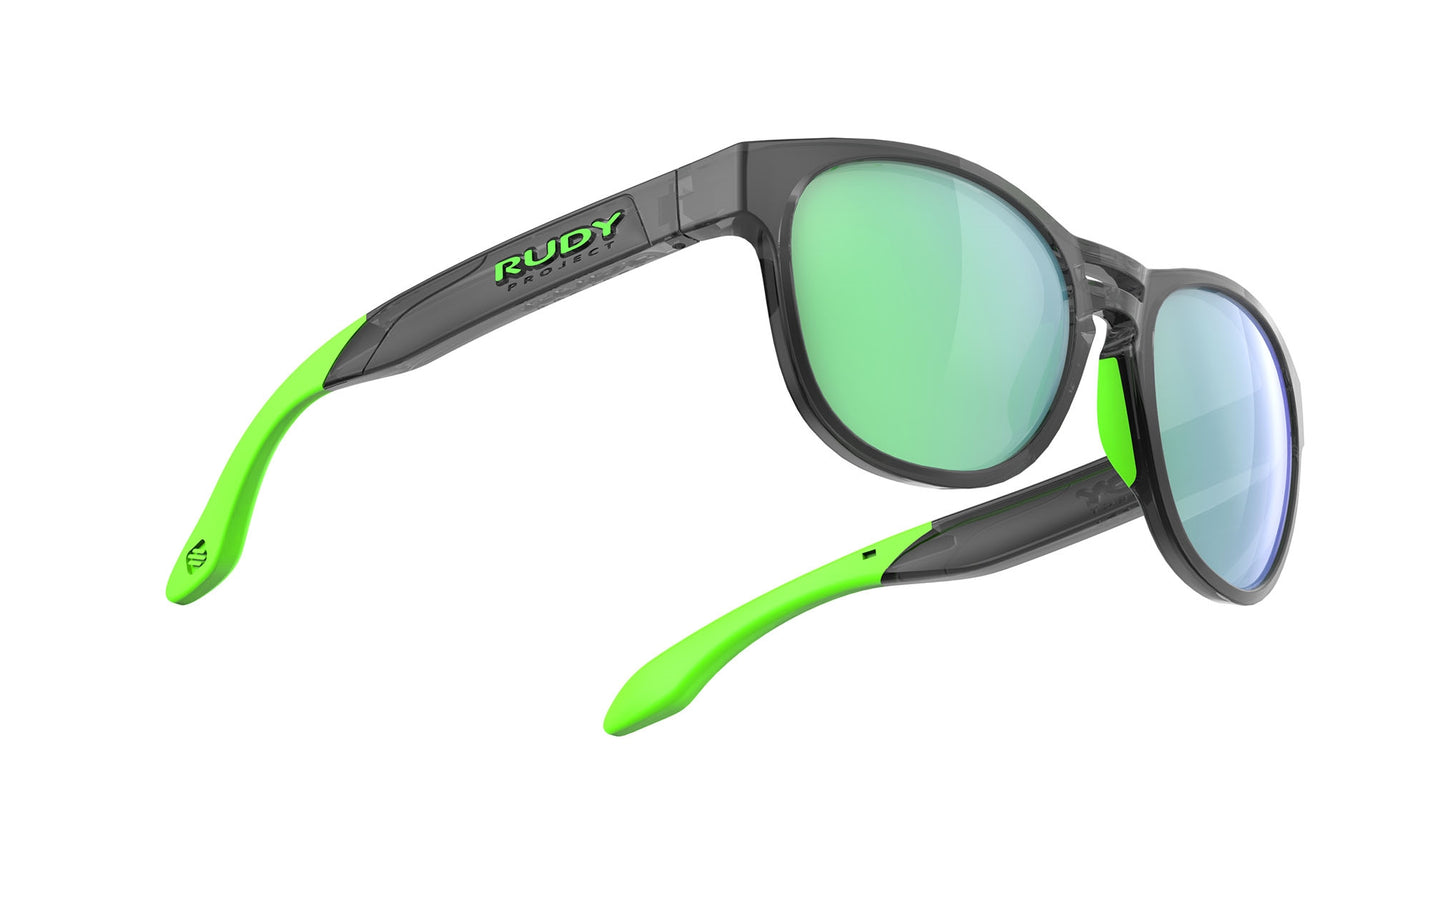 Load image into Gallery viewer, Rudy Project Spinair 56 Crystal Graphite - Polar 3Fx Hdr Multilaser Green Sunglasses
